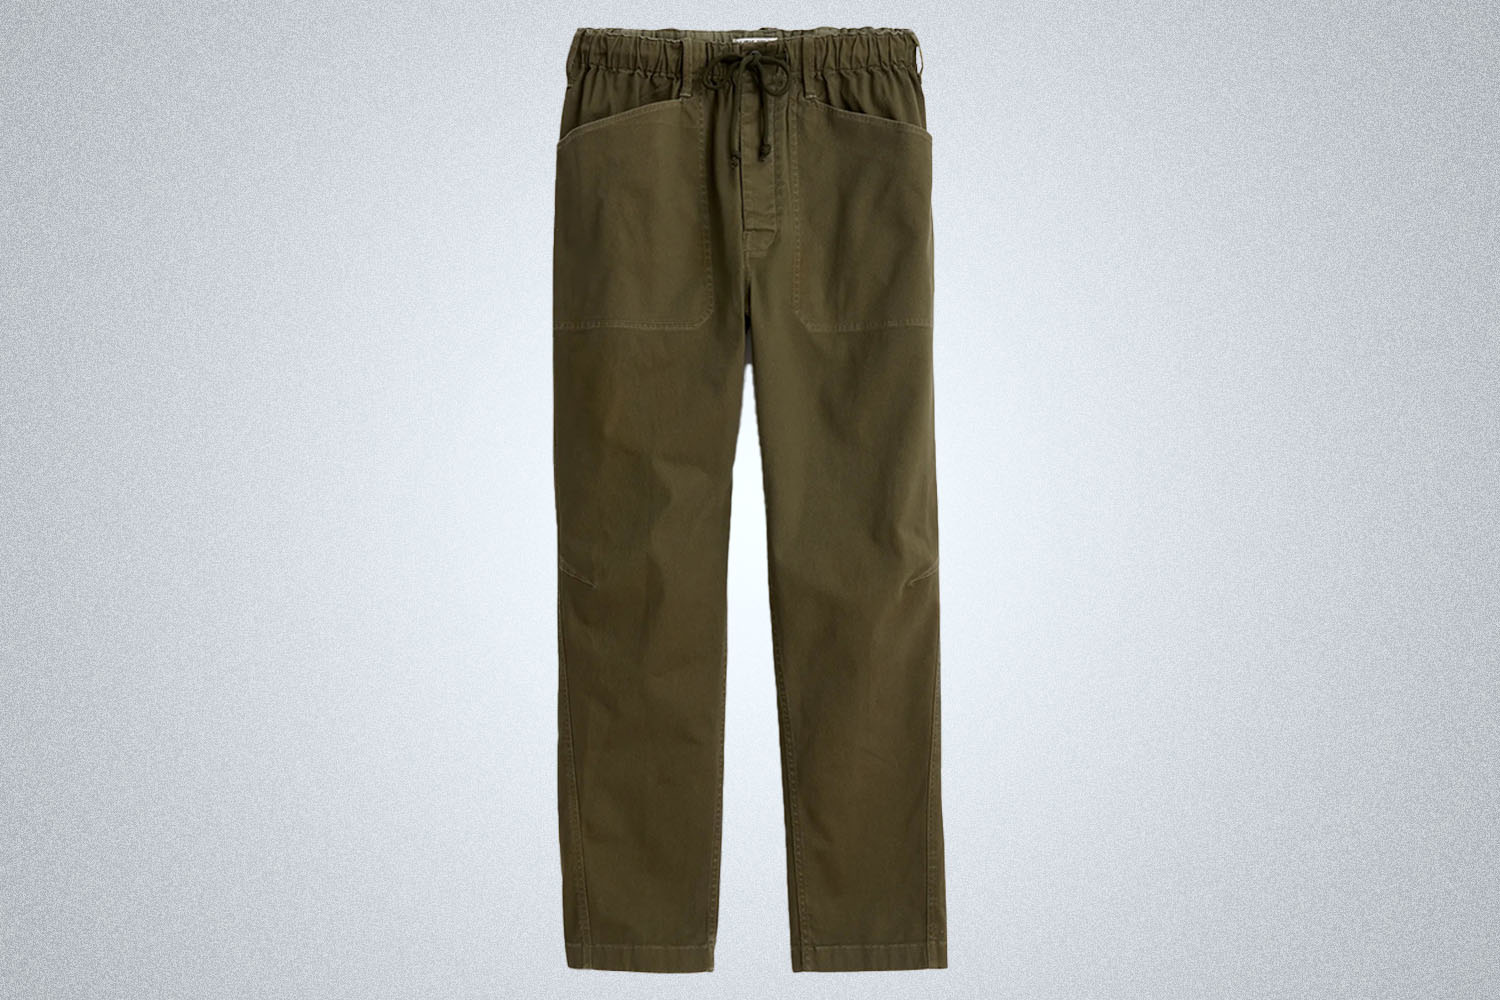 900 Lightweight Breathable Country Sport Trousers  Green  Decathlon